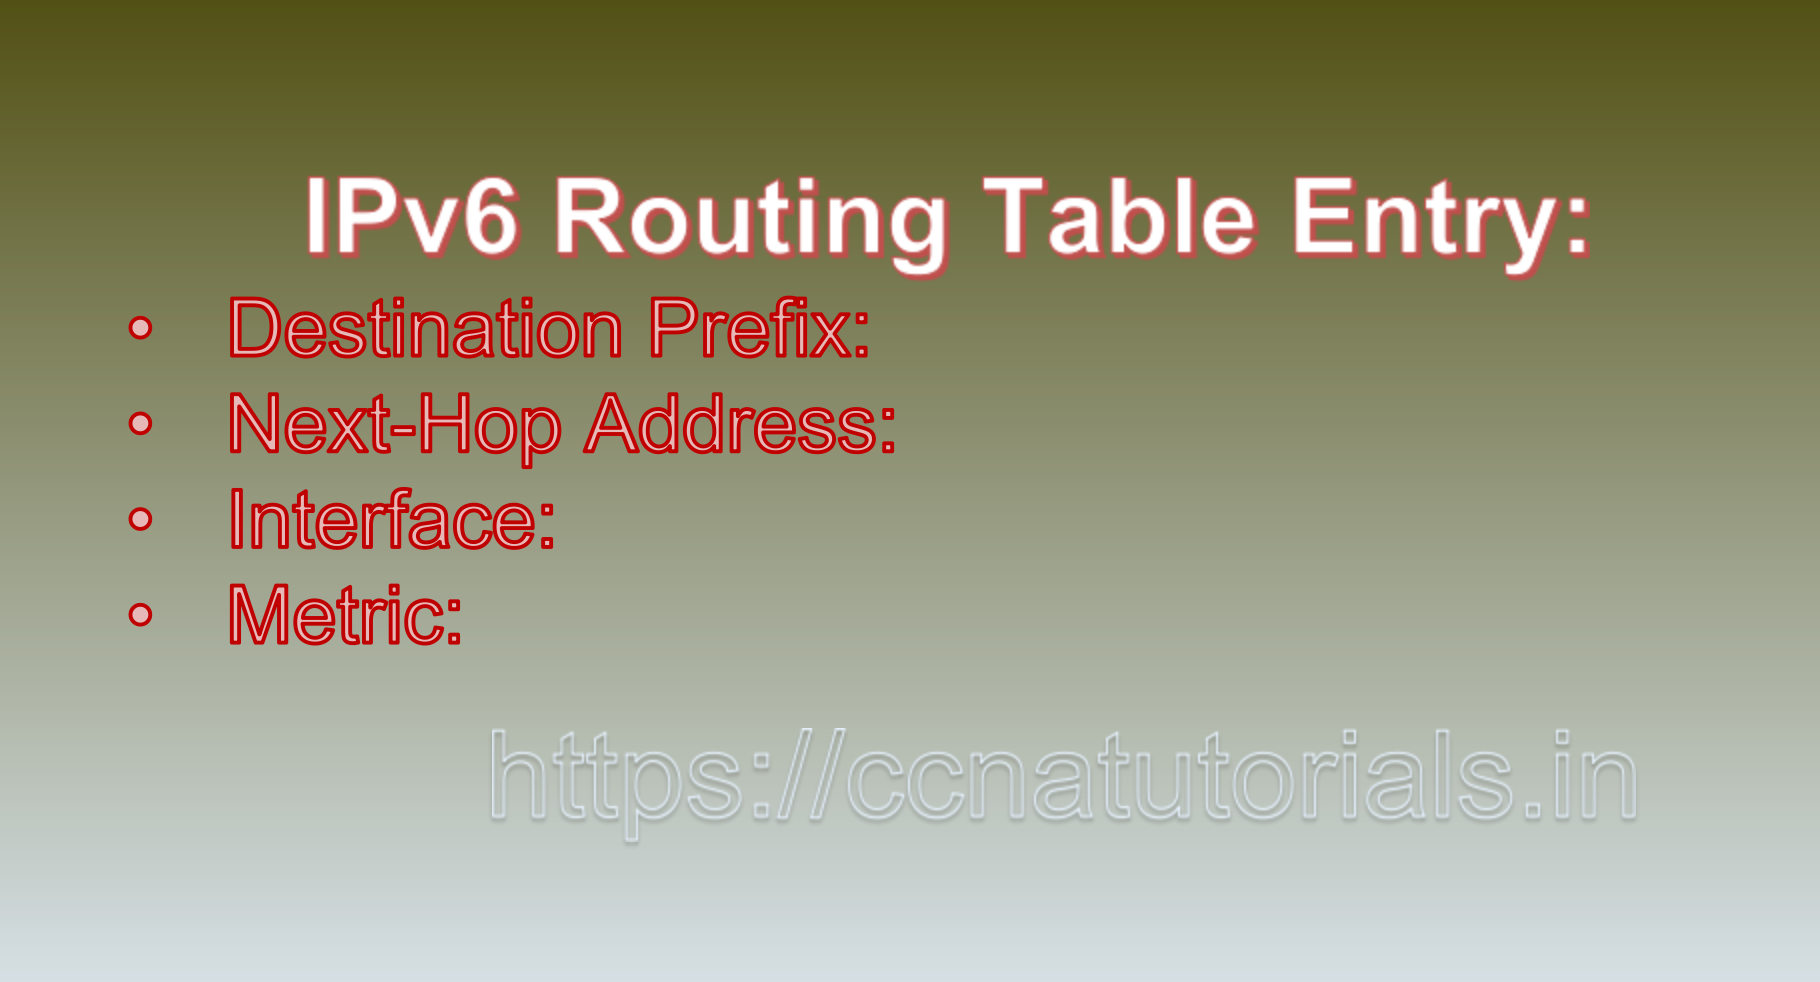 IPv6 Routing Table and Management, ccna, ccna tutorials